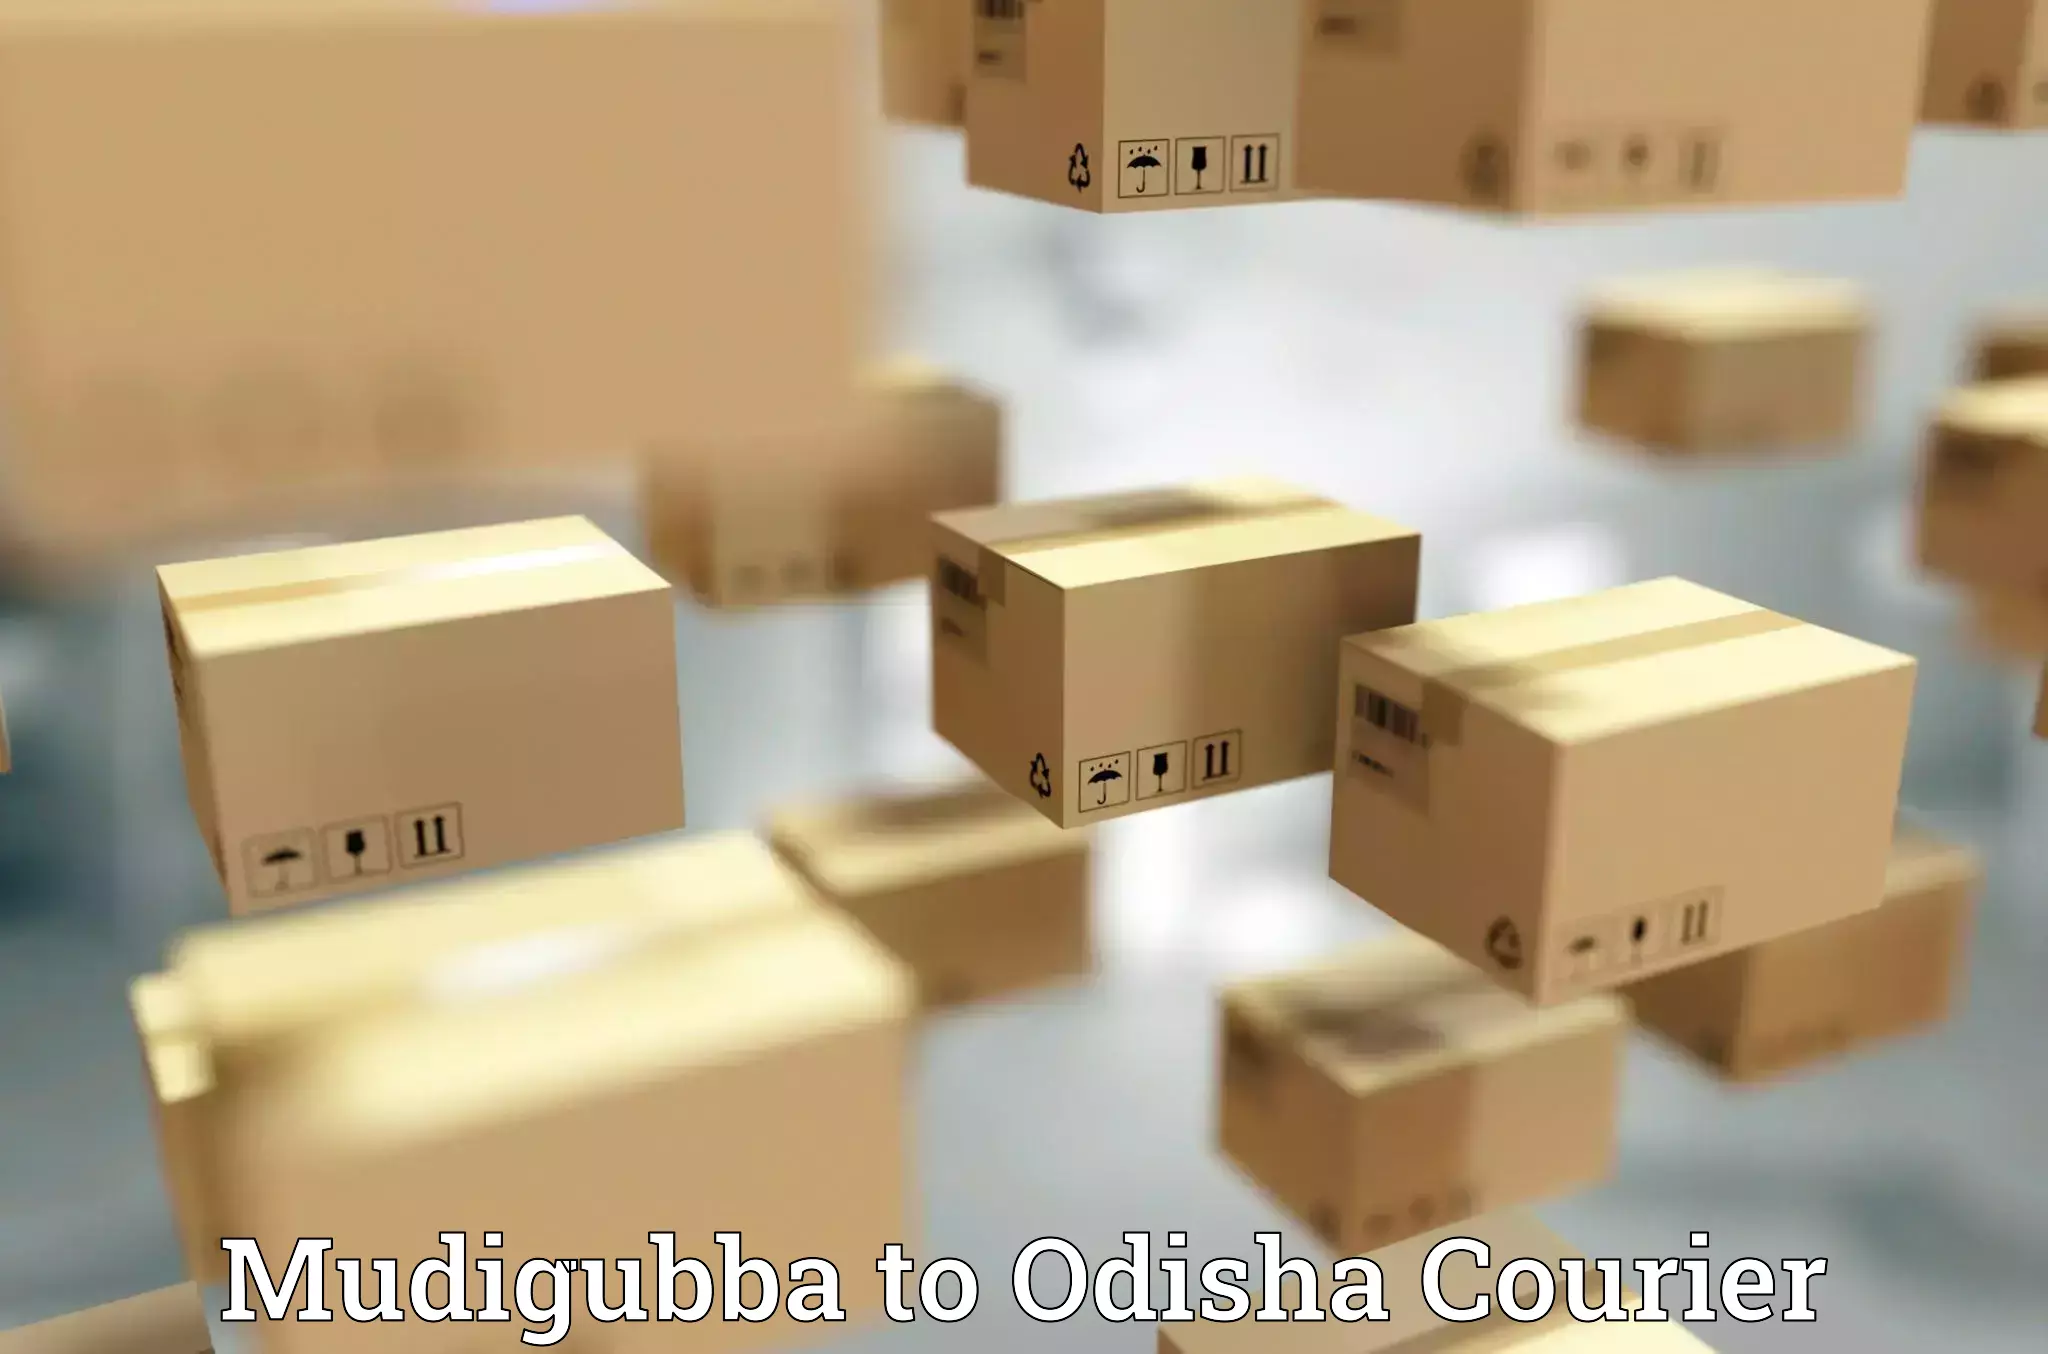 24-hour courier service Mudigubba to Paradip Port